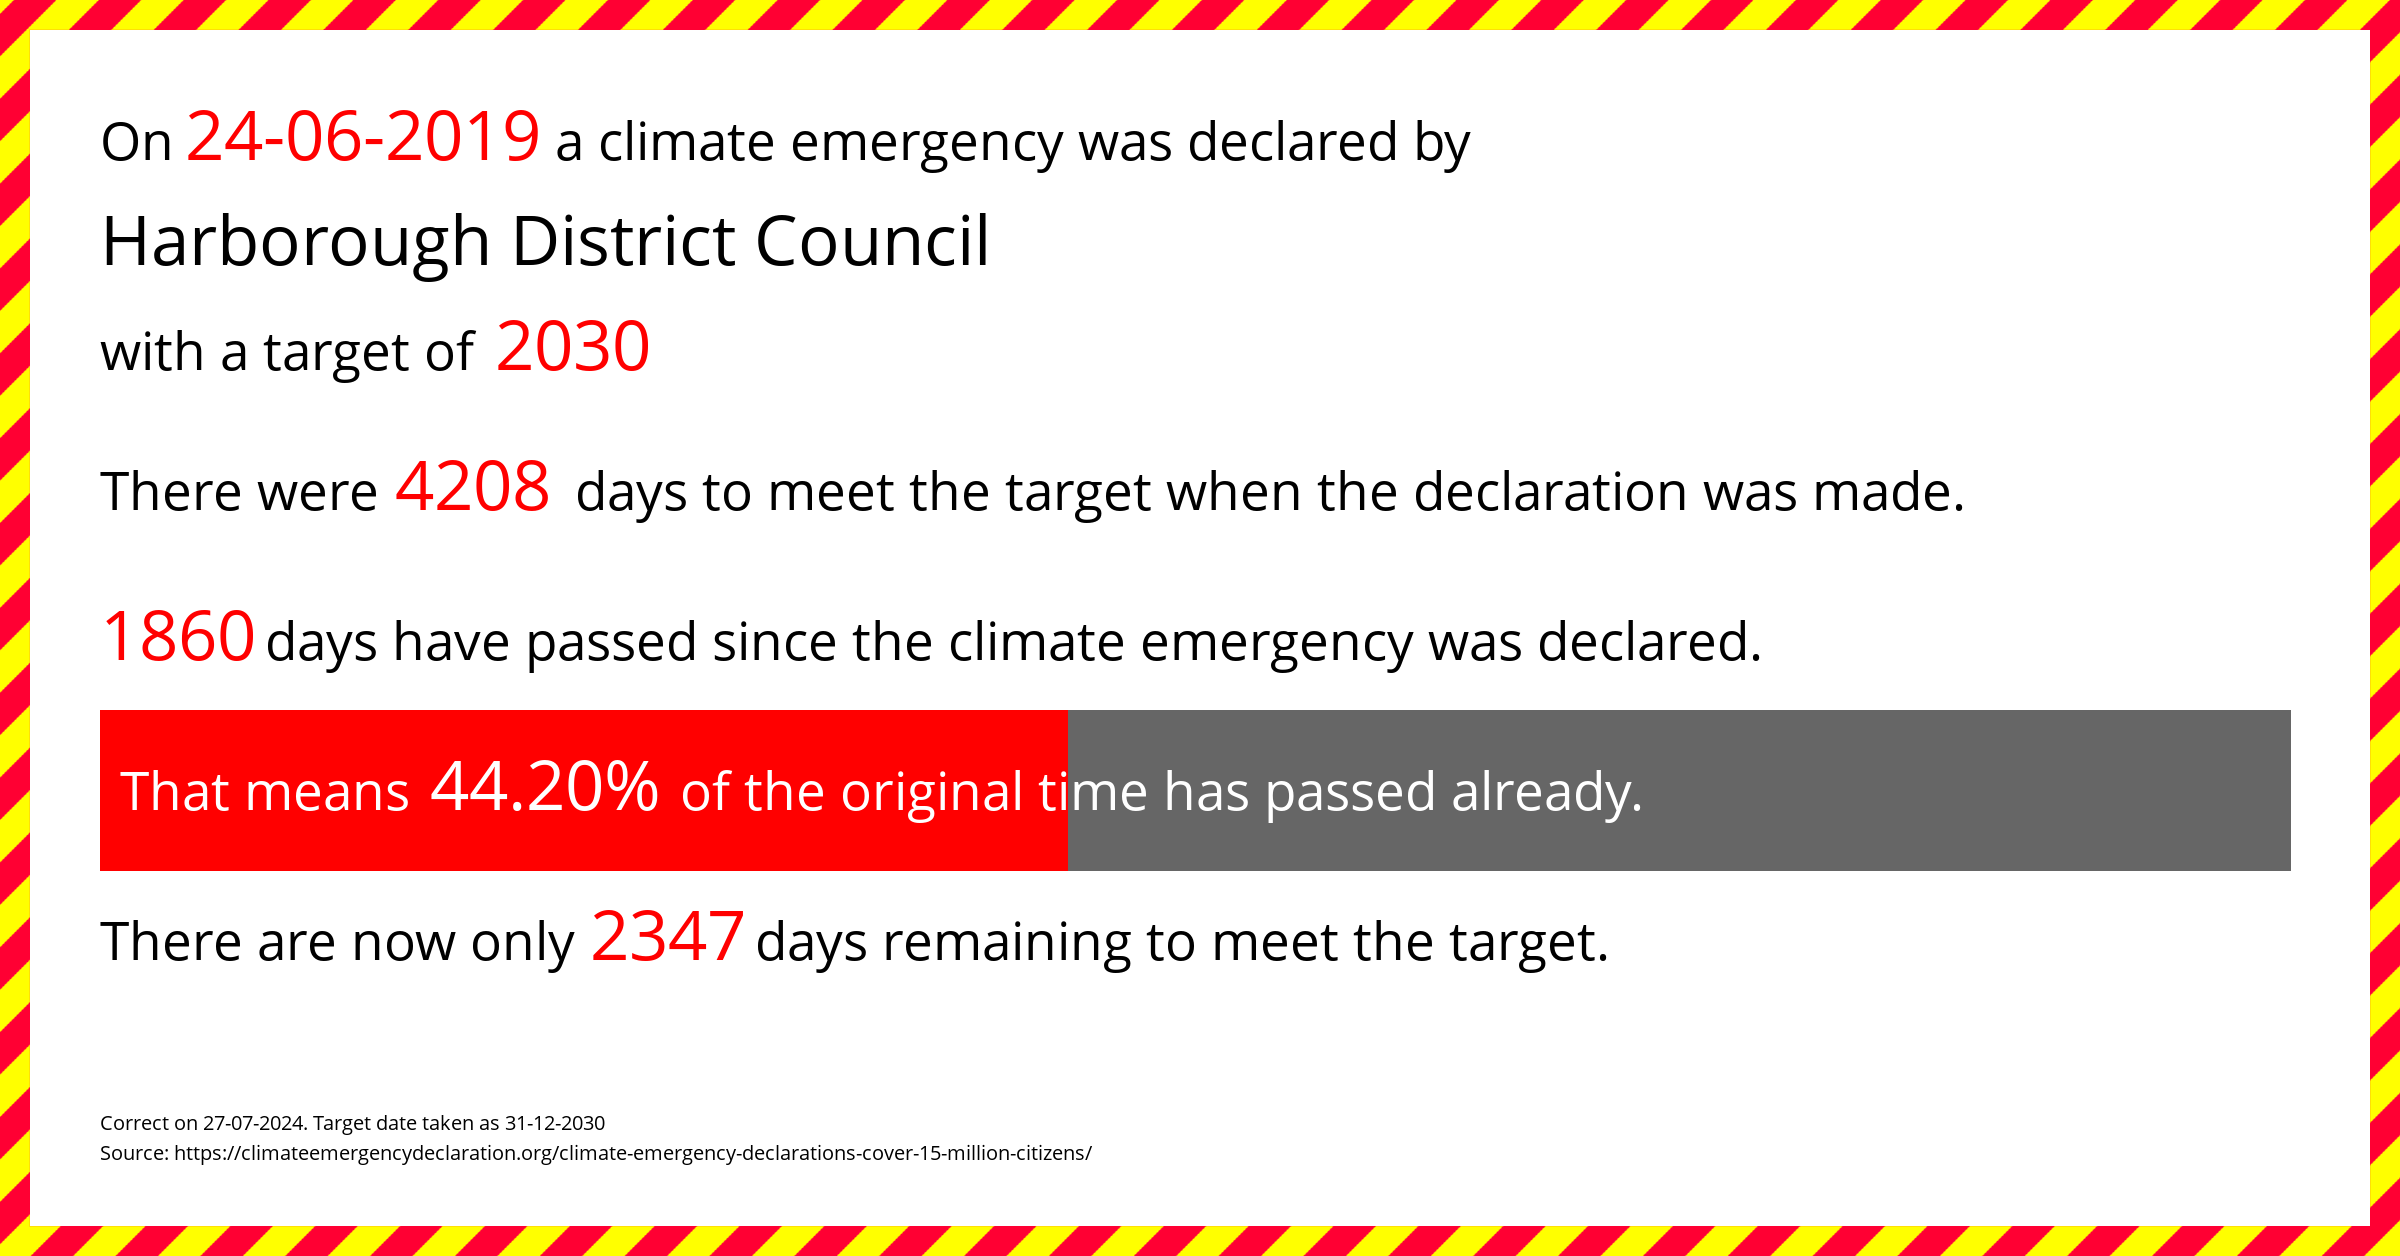 Harborough District Council declared a Climate emergency on Monday 24th June 2019, with a target of 2030.